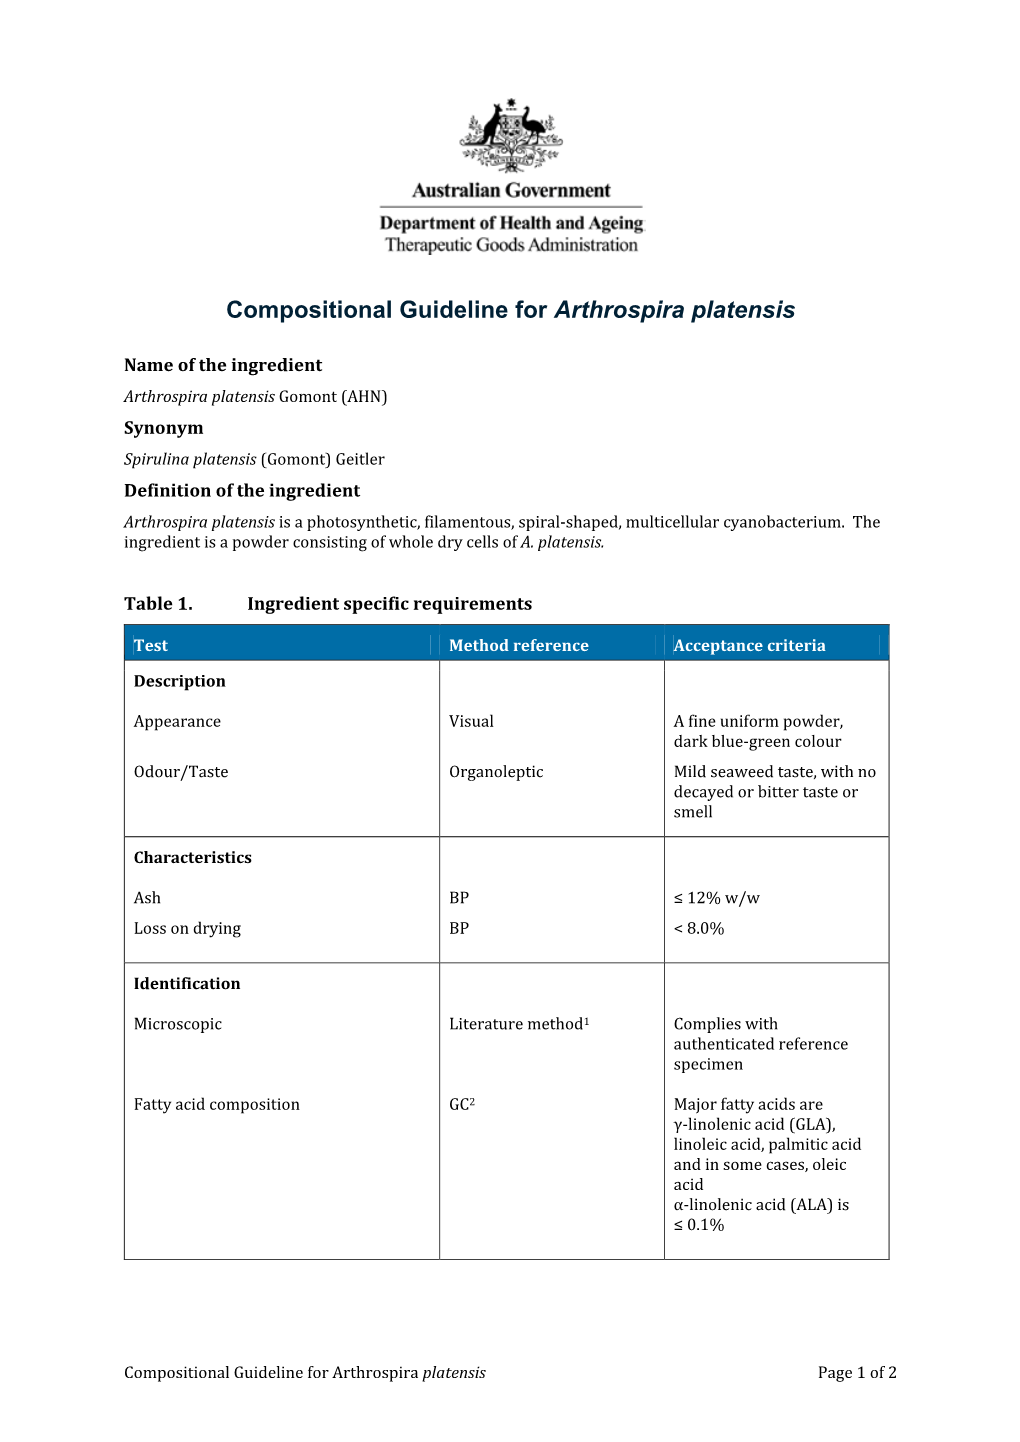 Compositional Guideline for Arthrospira Platensis